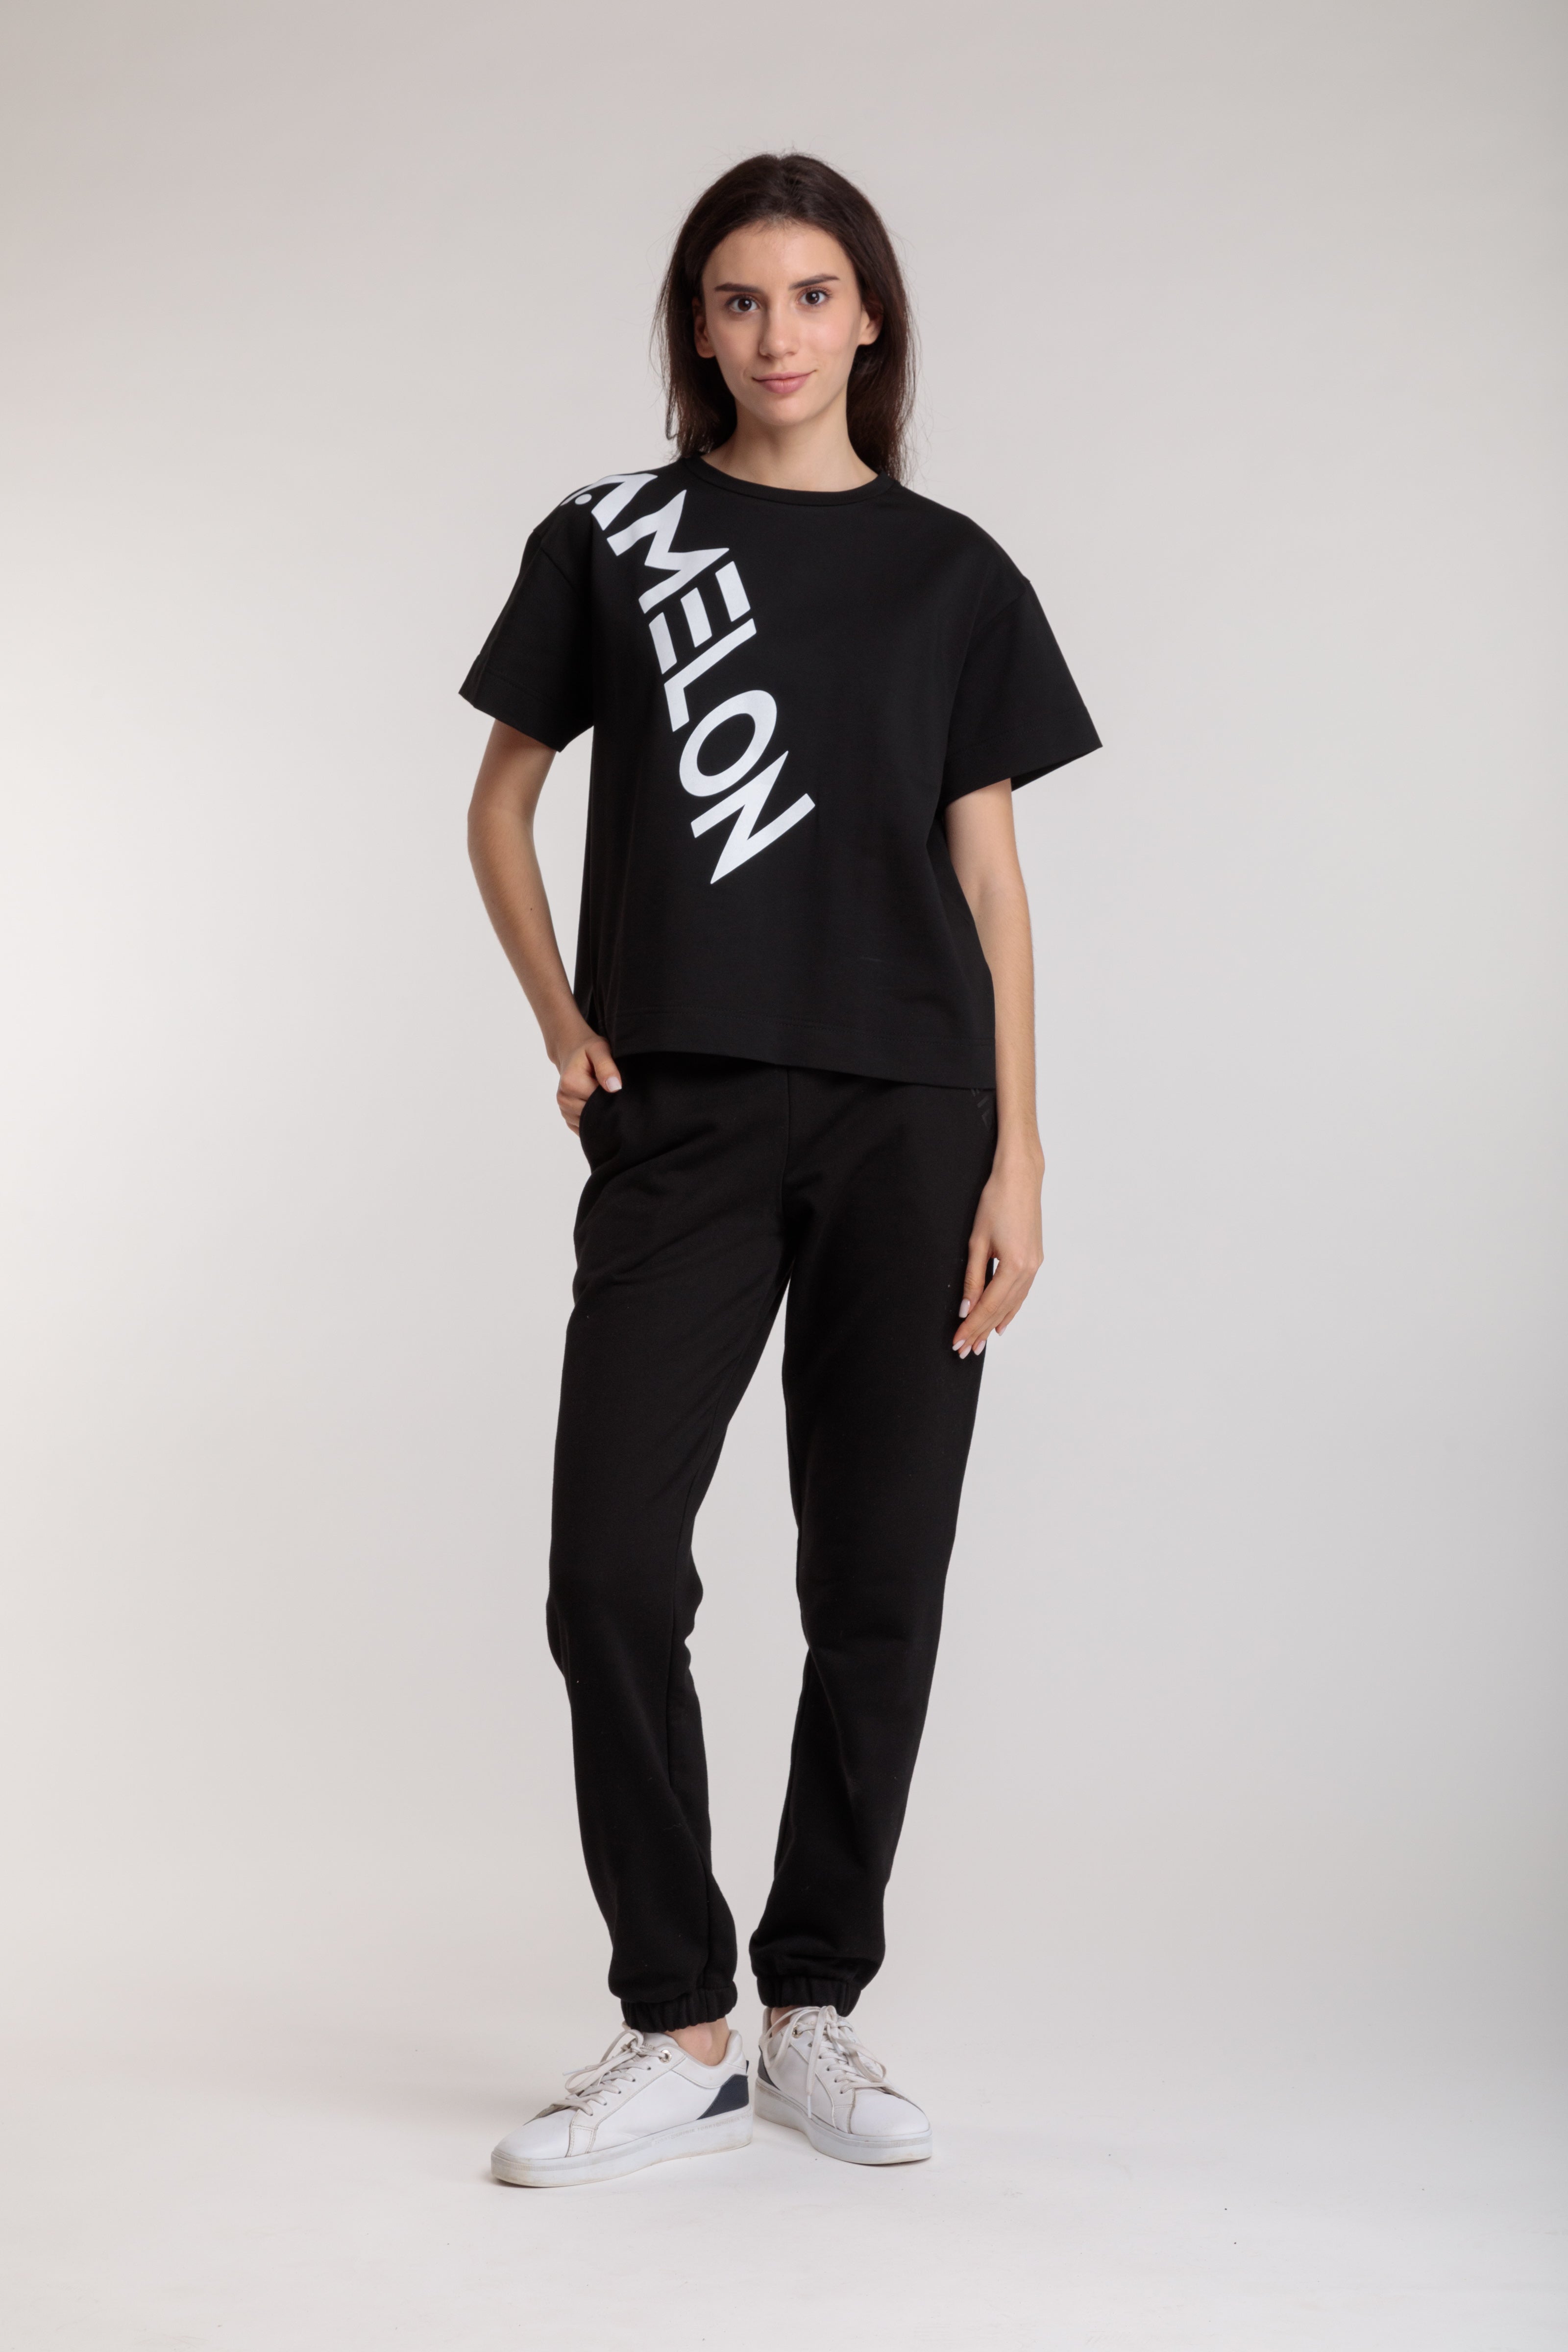 Women's straight black t-shirt with a large white lettering